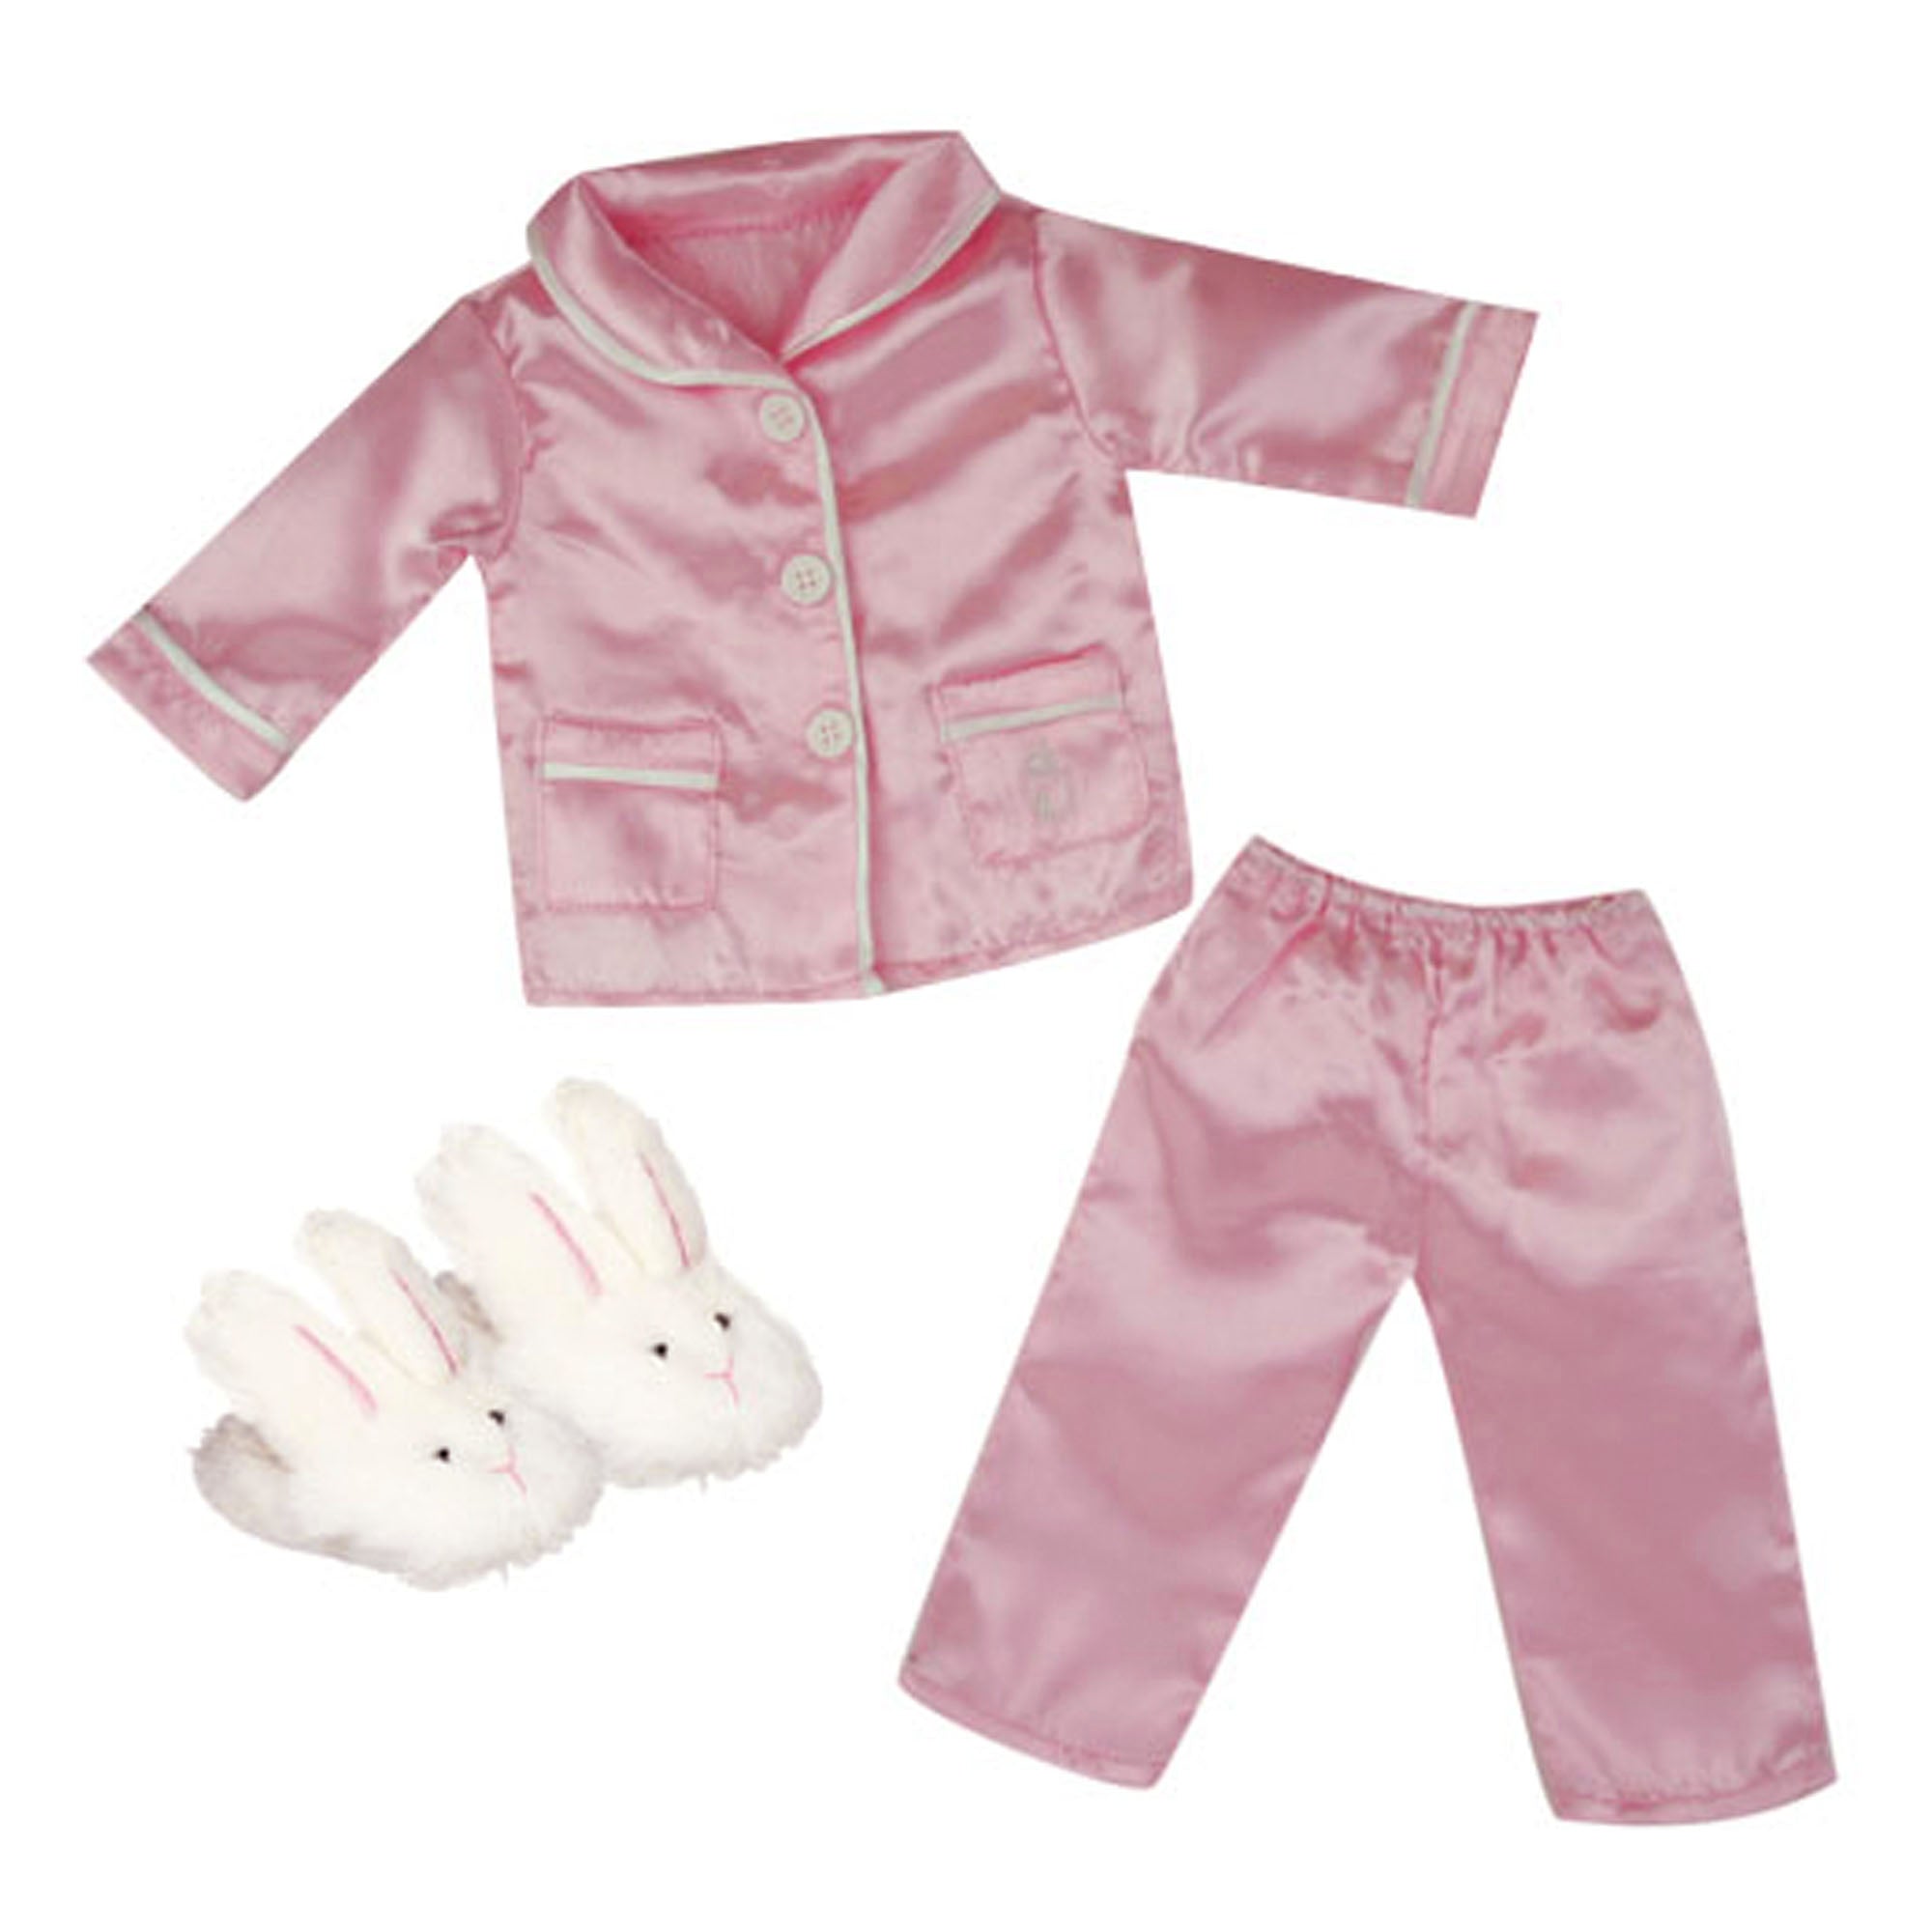 Sophia’s Super Cute Basic Solid-Colored Mix & Match Luxurious Satin Pajama Set with Fuzzy Bunny Slippers for 18” Dolls, Pink